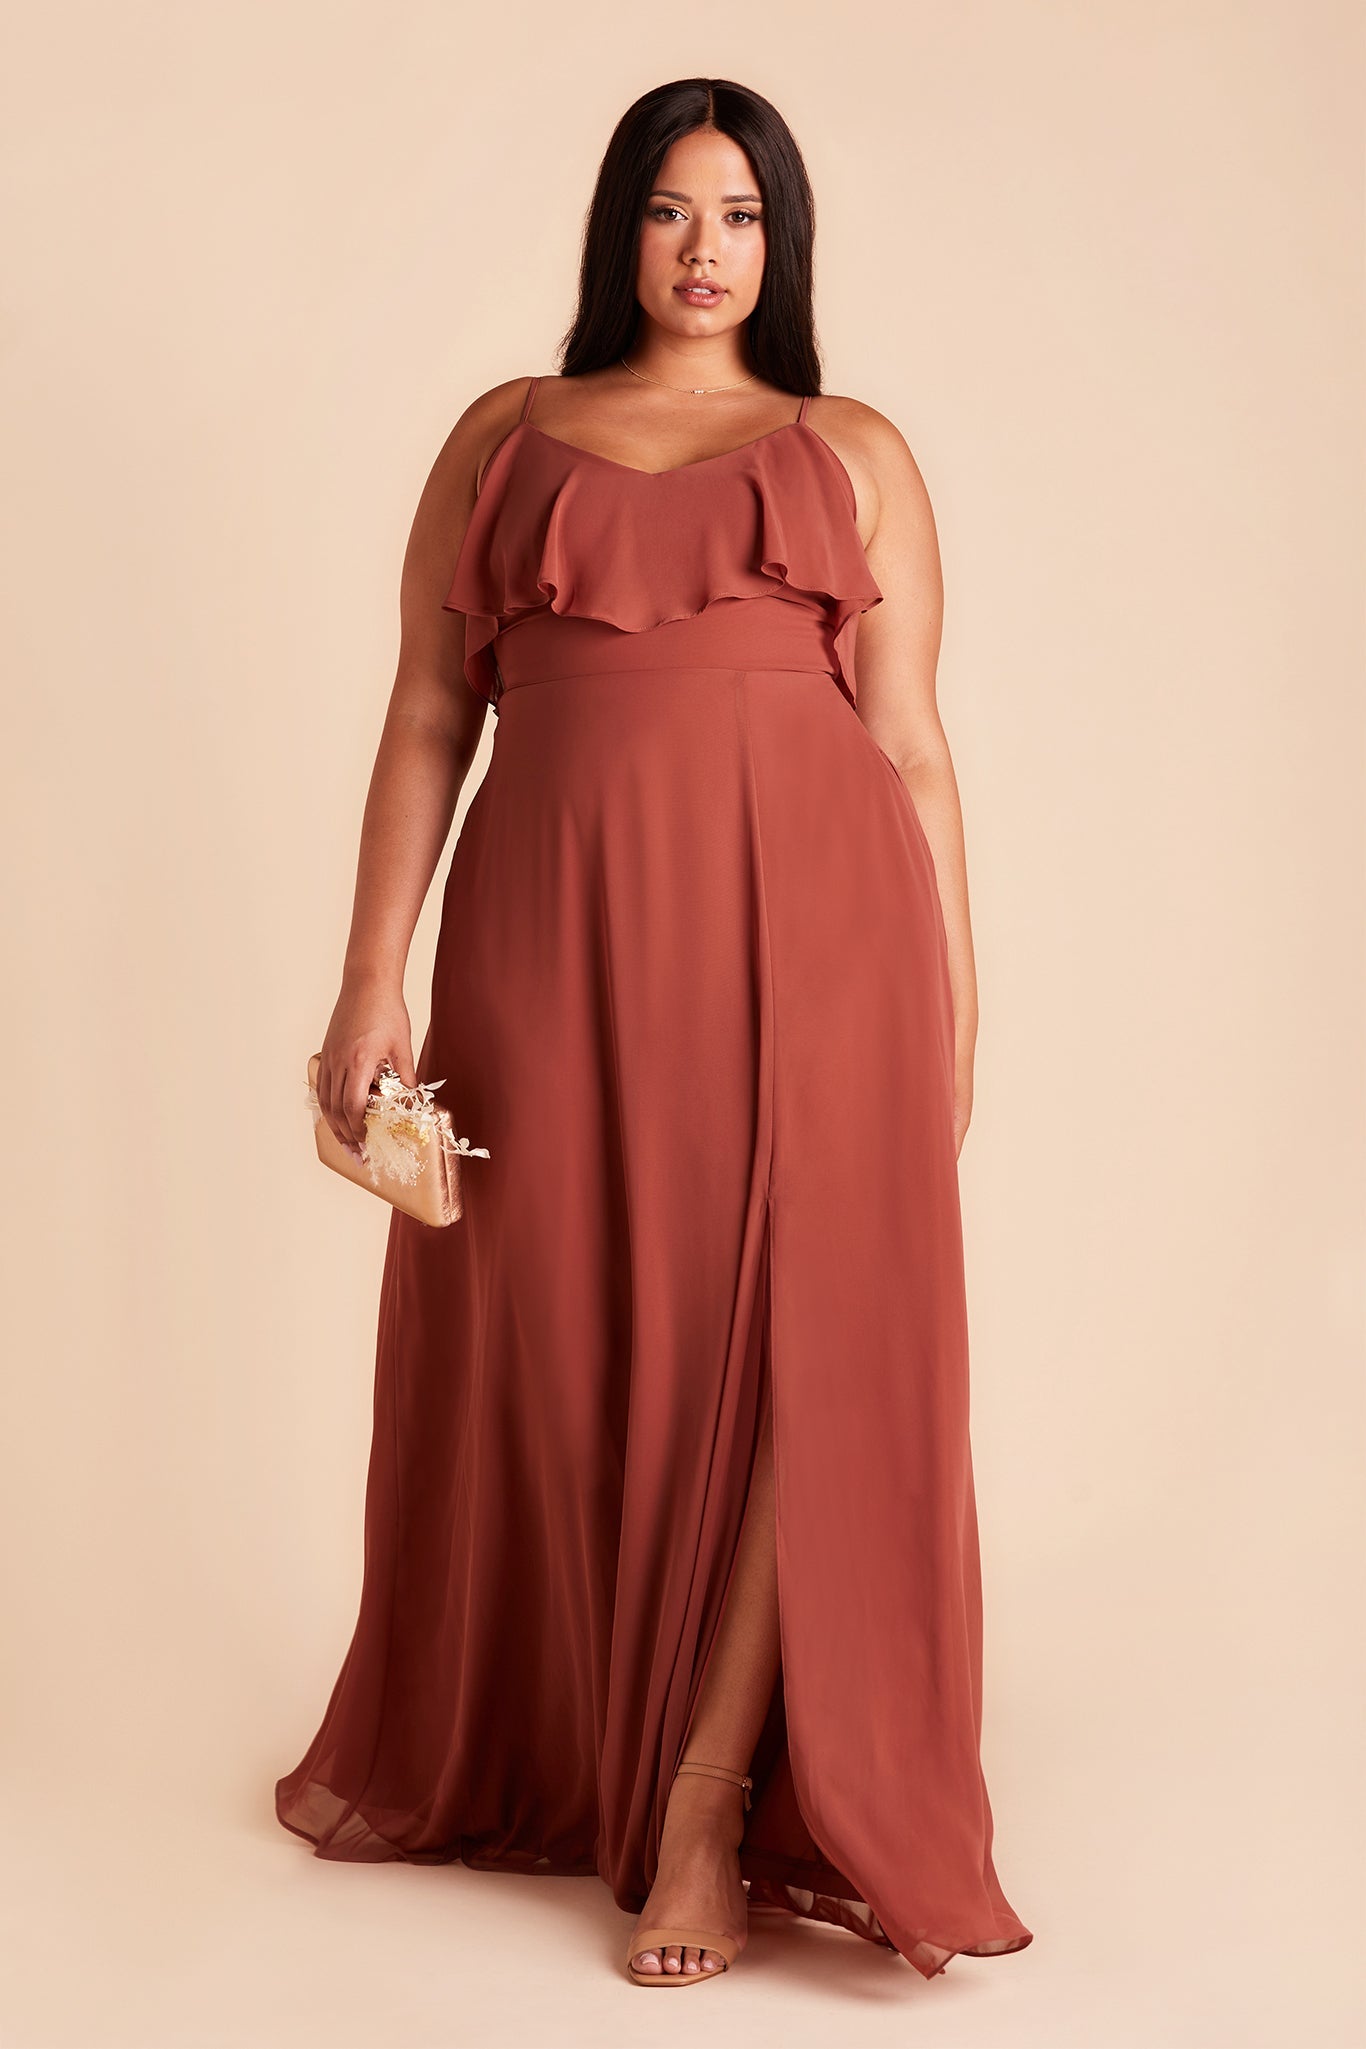 Jane convertible plus size bridesmaid dress with slit in spice chiffon by Birdy Grey, front view